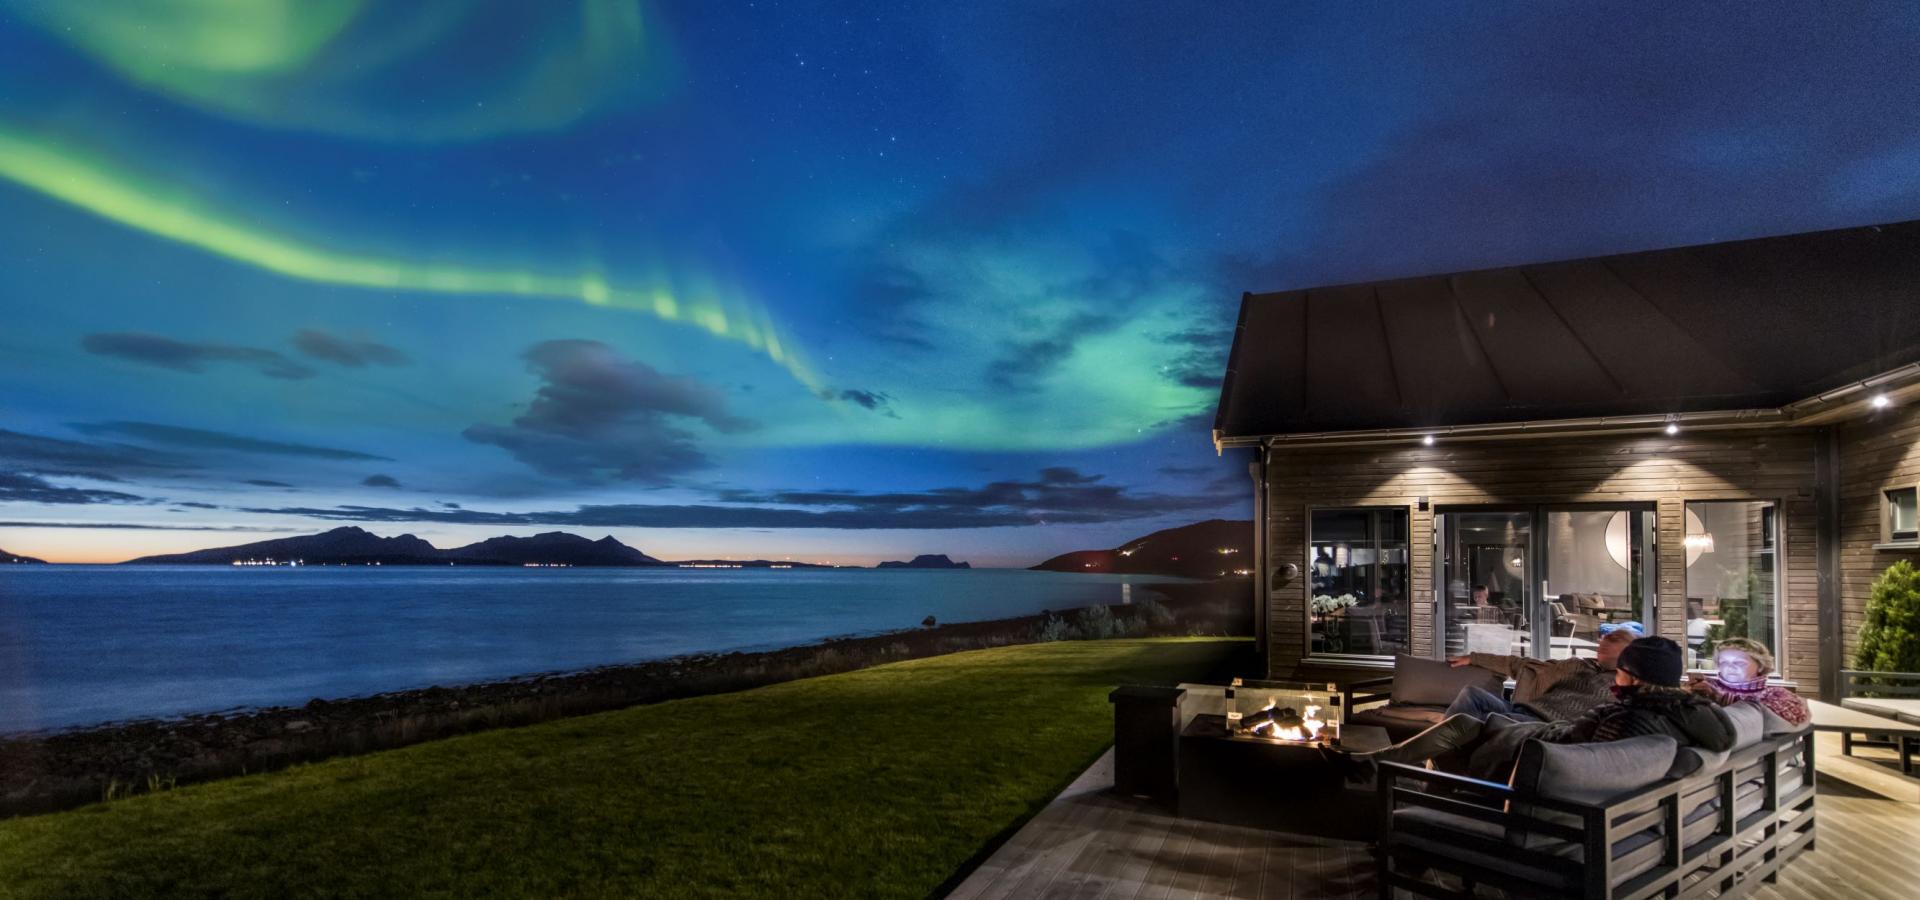 Viewing the northern lights from the terrace at Lyngen Experience Lodge, Northern Norway